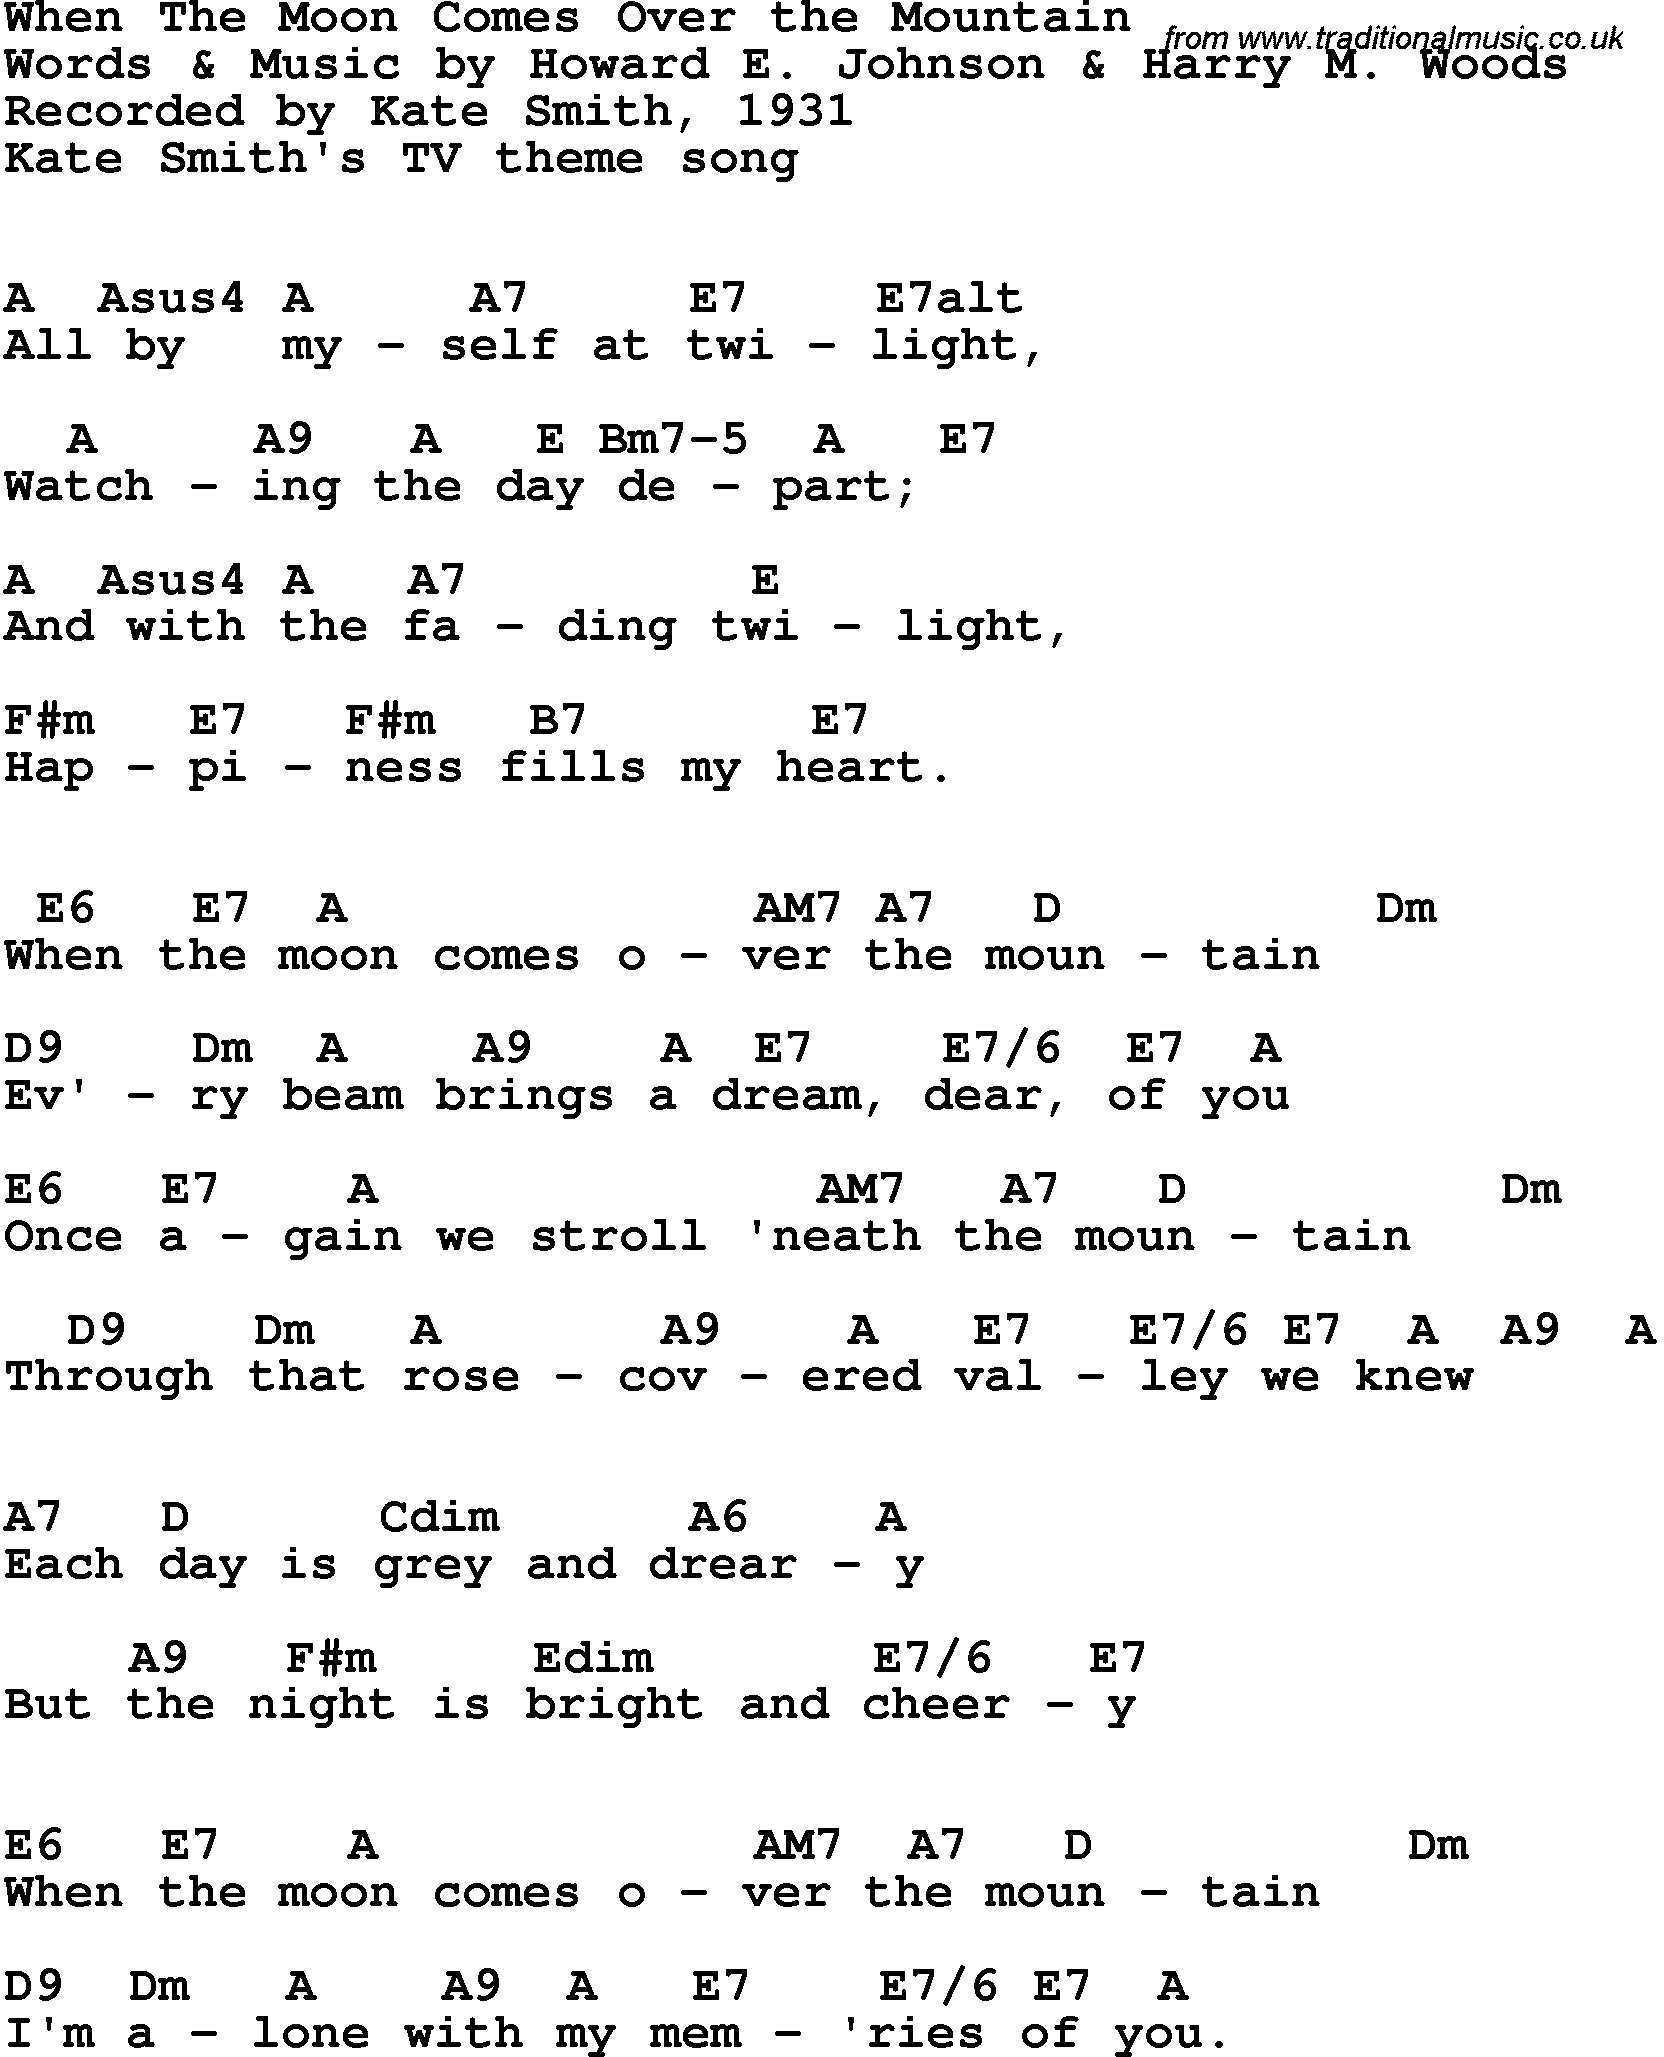 Song Lyrics with guitar chords for When The Moon Comes Over The Mountain - Kate Smith, 1931